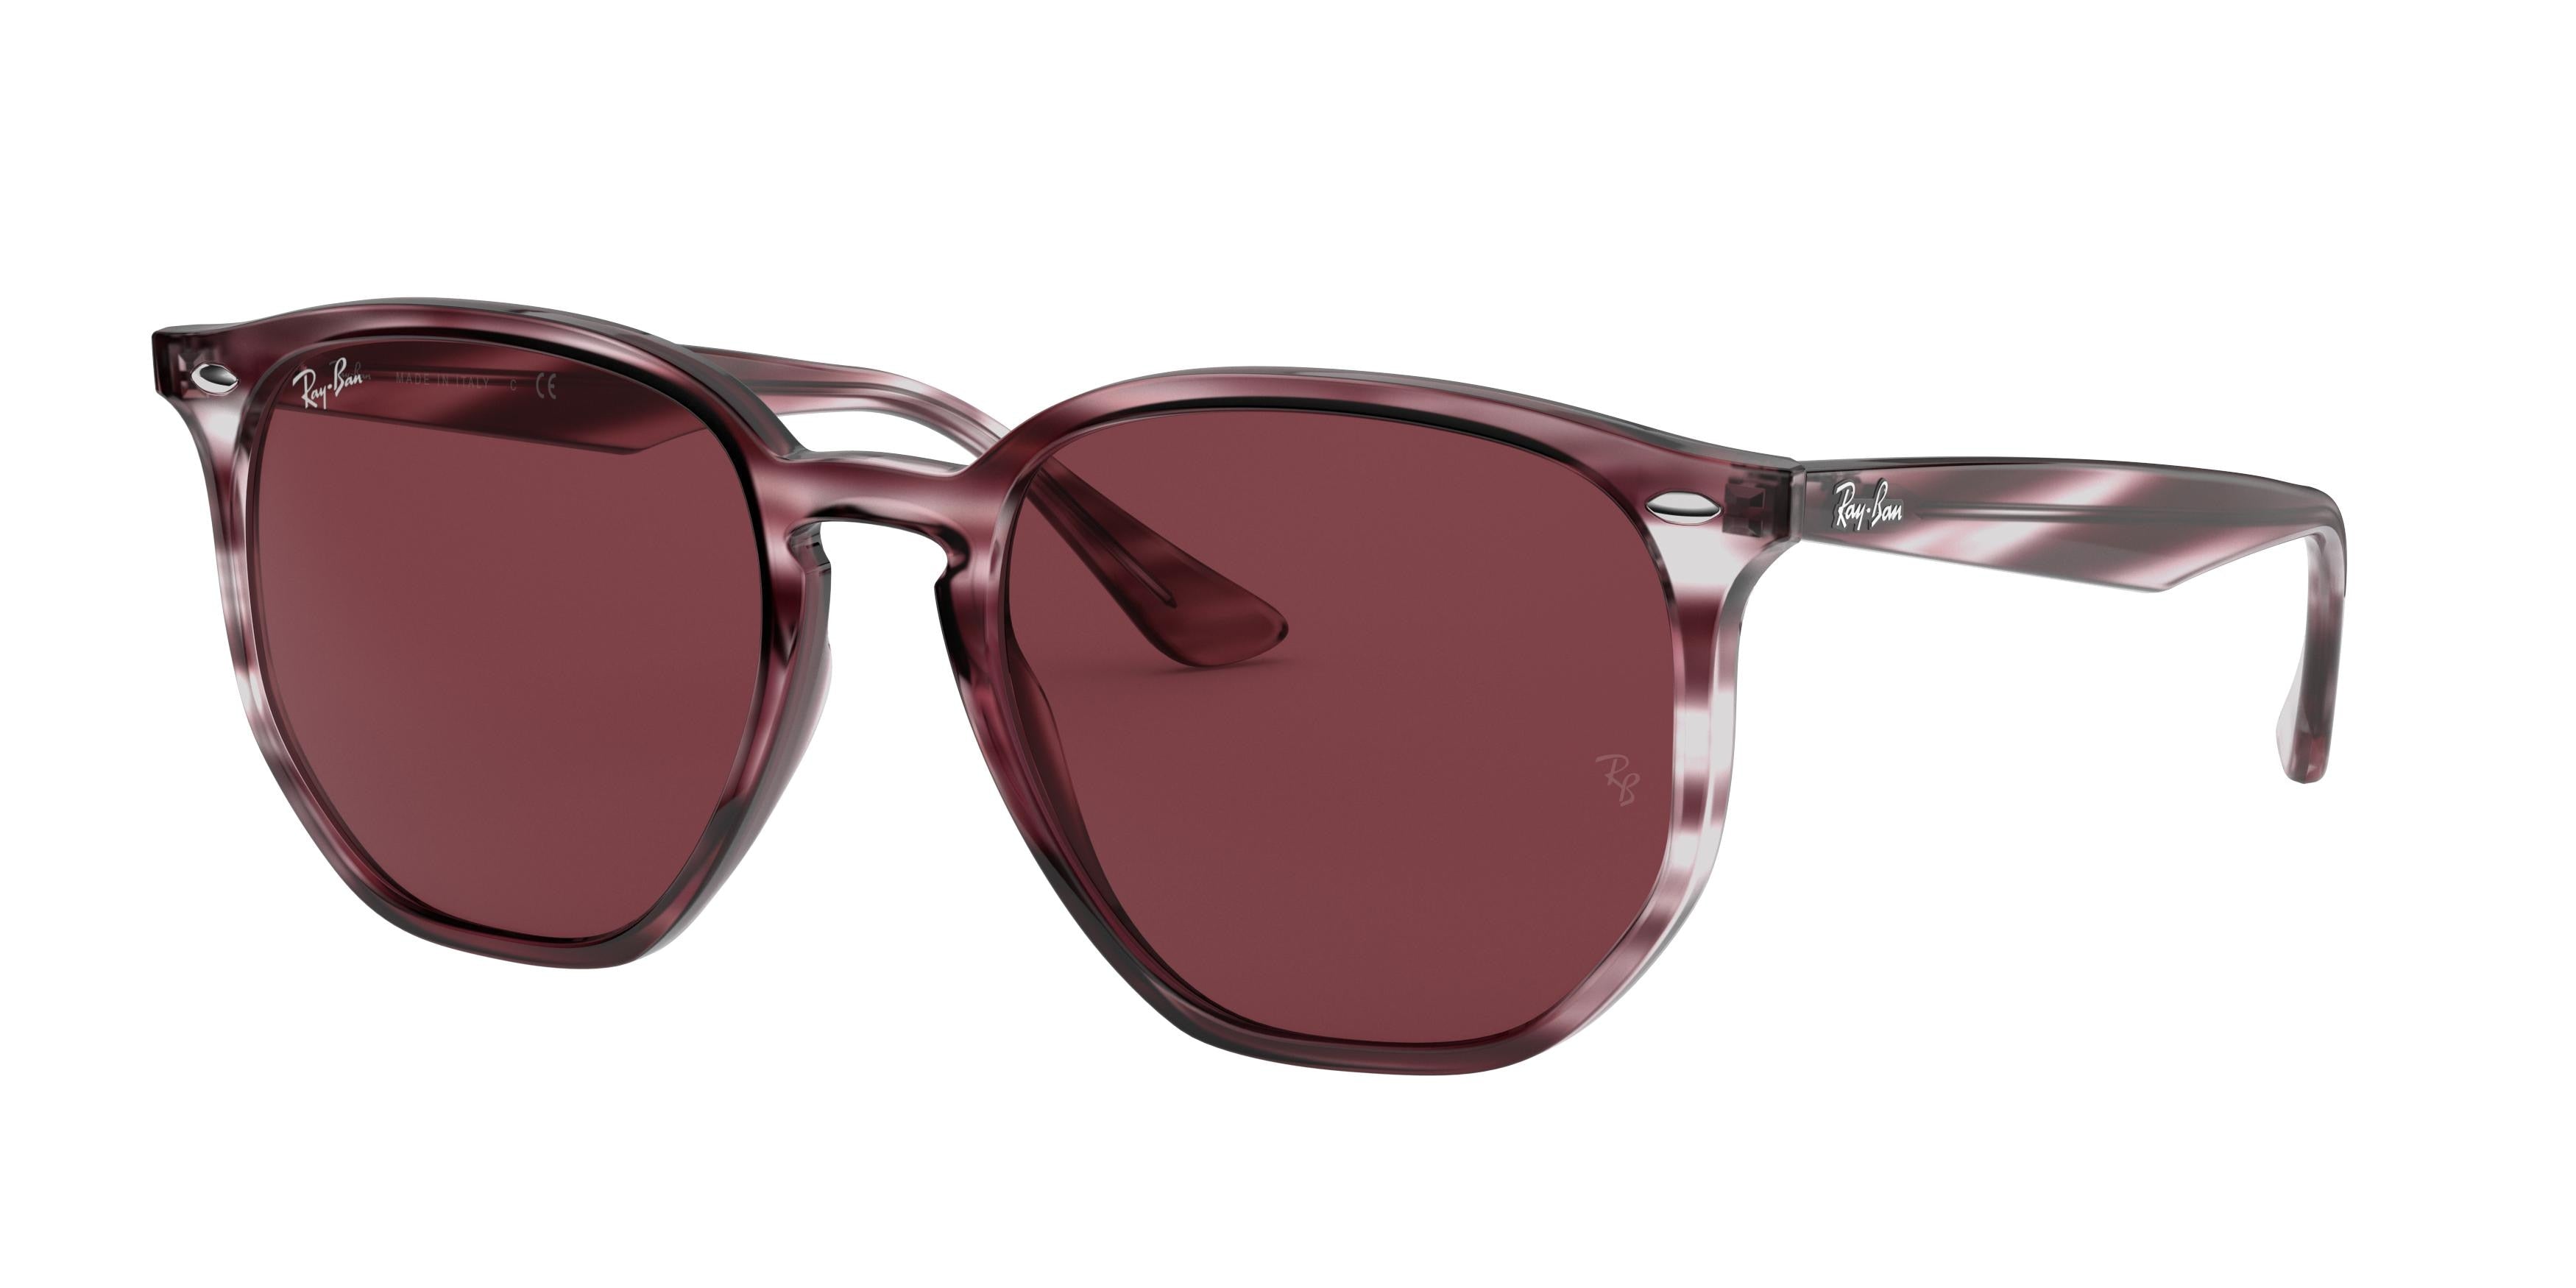 Ray-Ban RB4306 Irregular Sunglasses  643175-Striped Bordeaux Havana 54-145-19 - Color Map Red